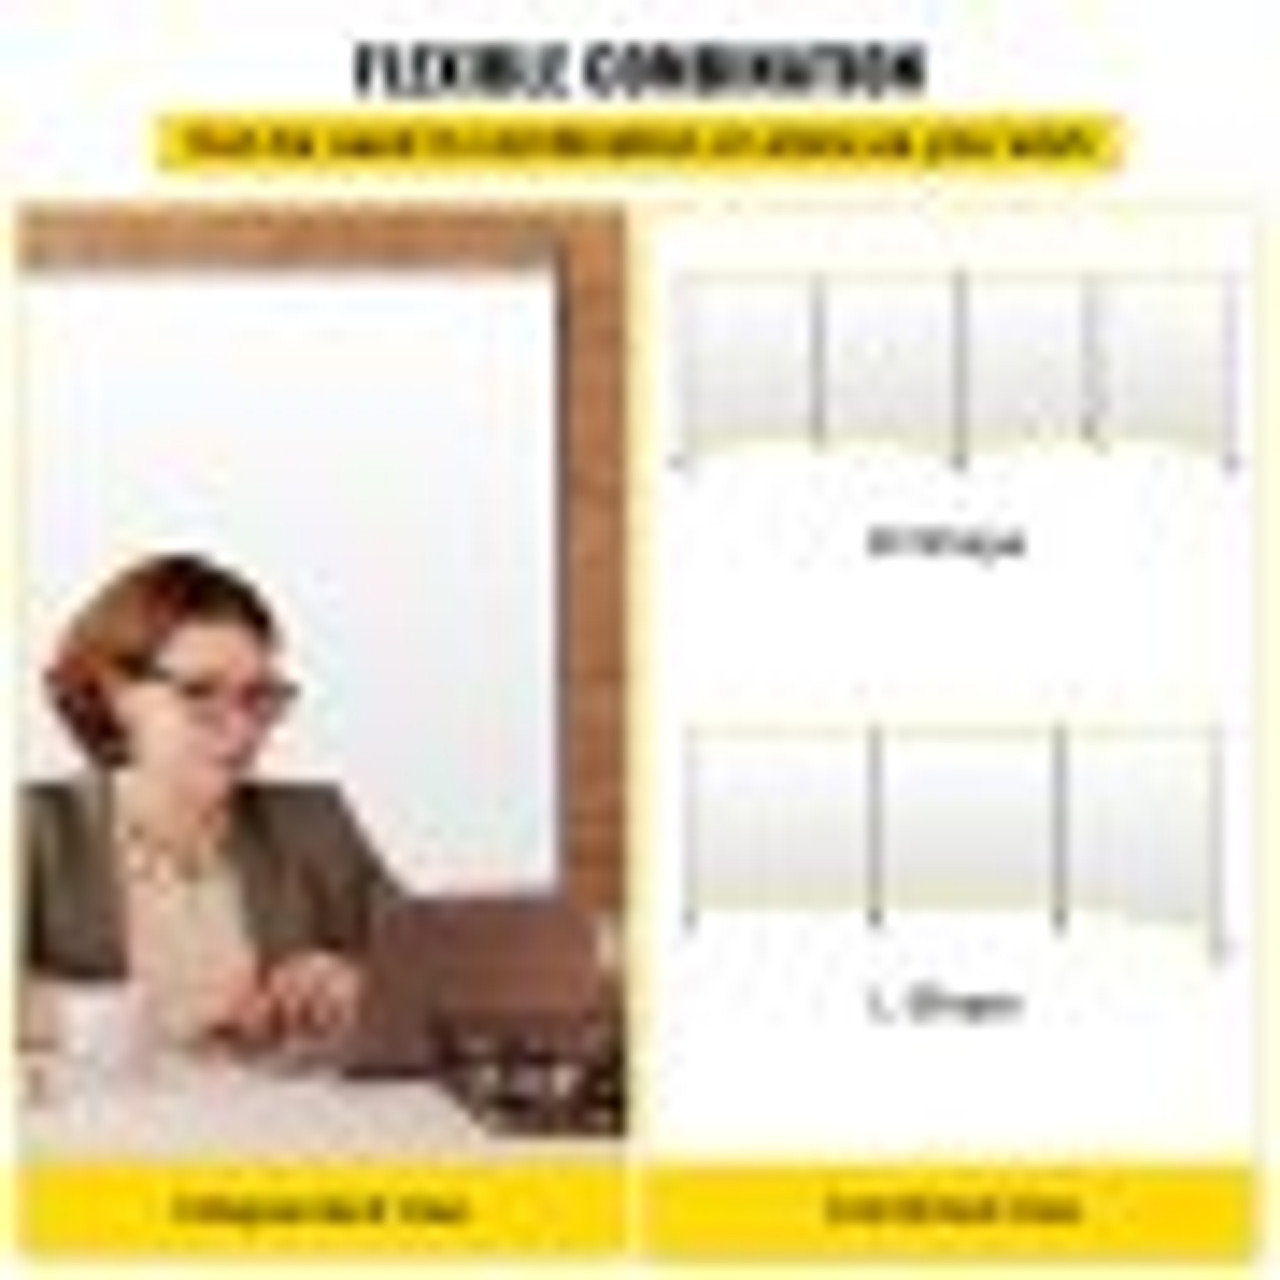 Office Partition 71" W x 14" D x 72" H Room Divider Wall w/Thicker Non-See-Through Fabric Office Divider Steel Base Portable Office Walls Divider Cream Room Partition for Room Office Restaurant